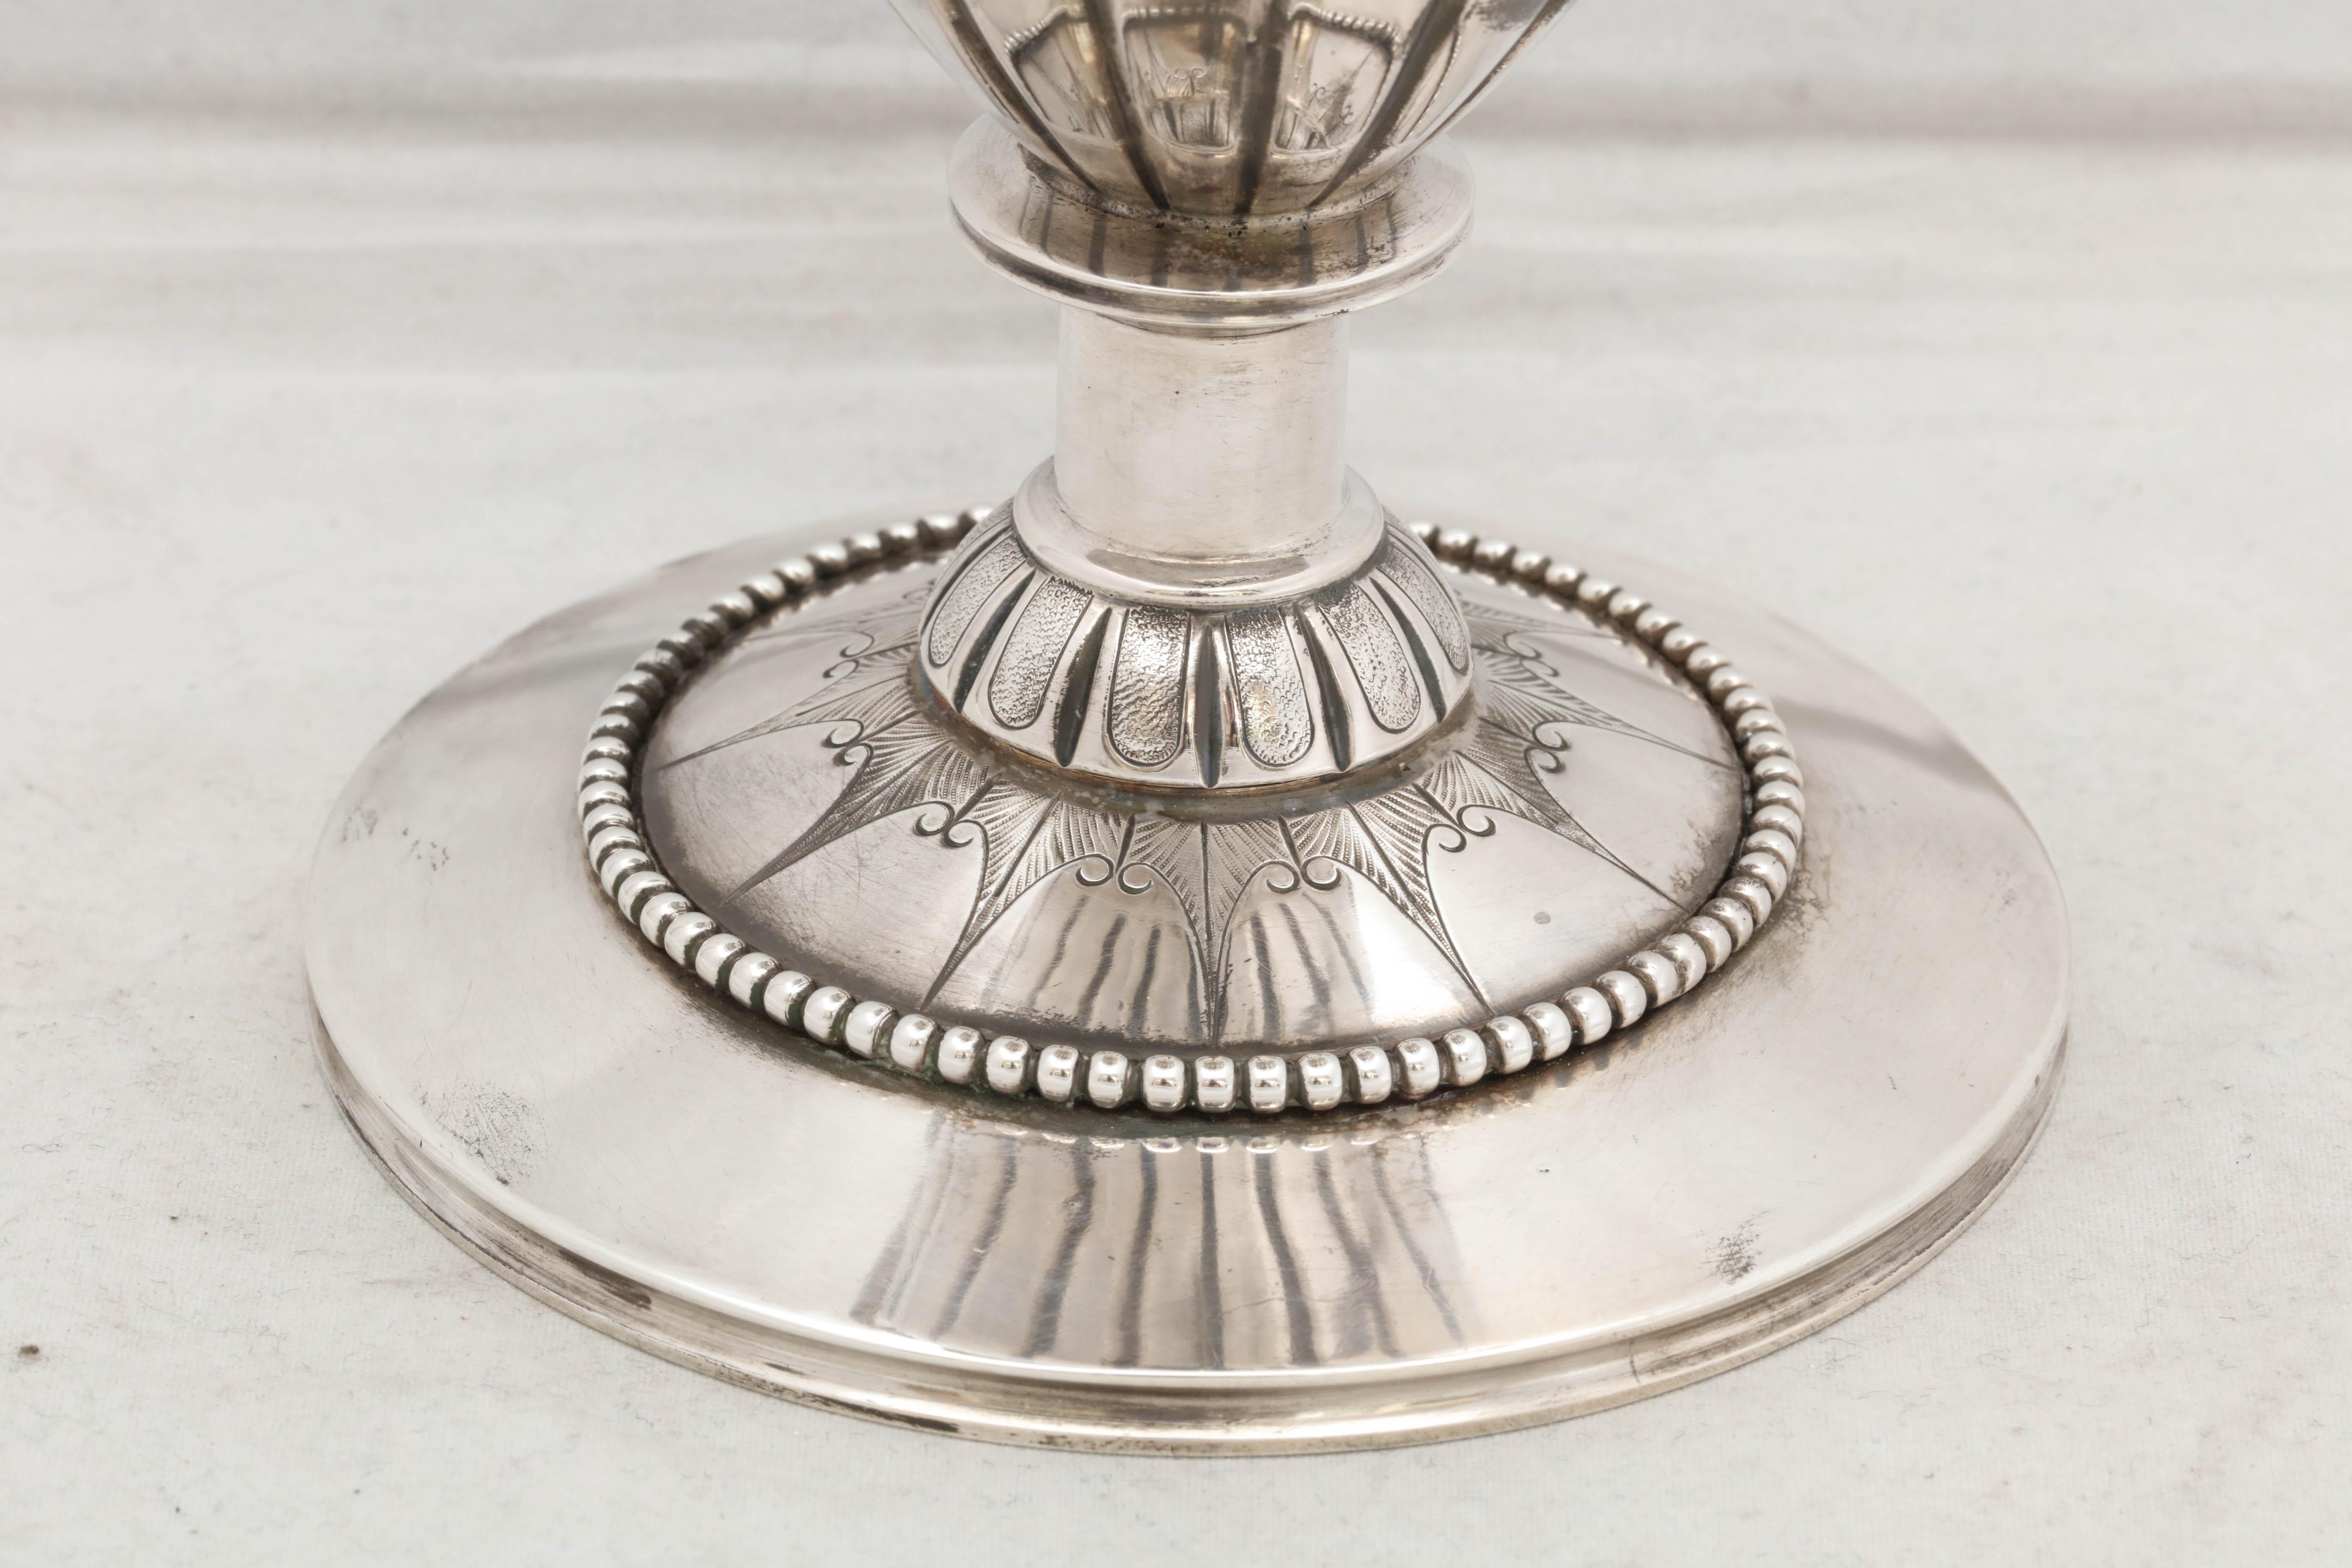 Neoclassical Coin Silver Pedestal Based Vase by Wood & Hughes 1